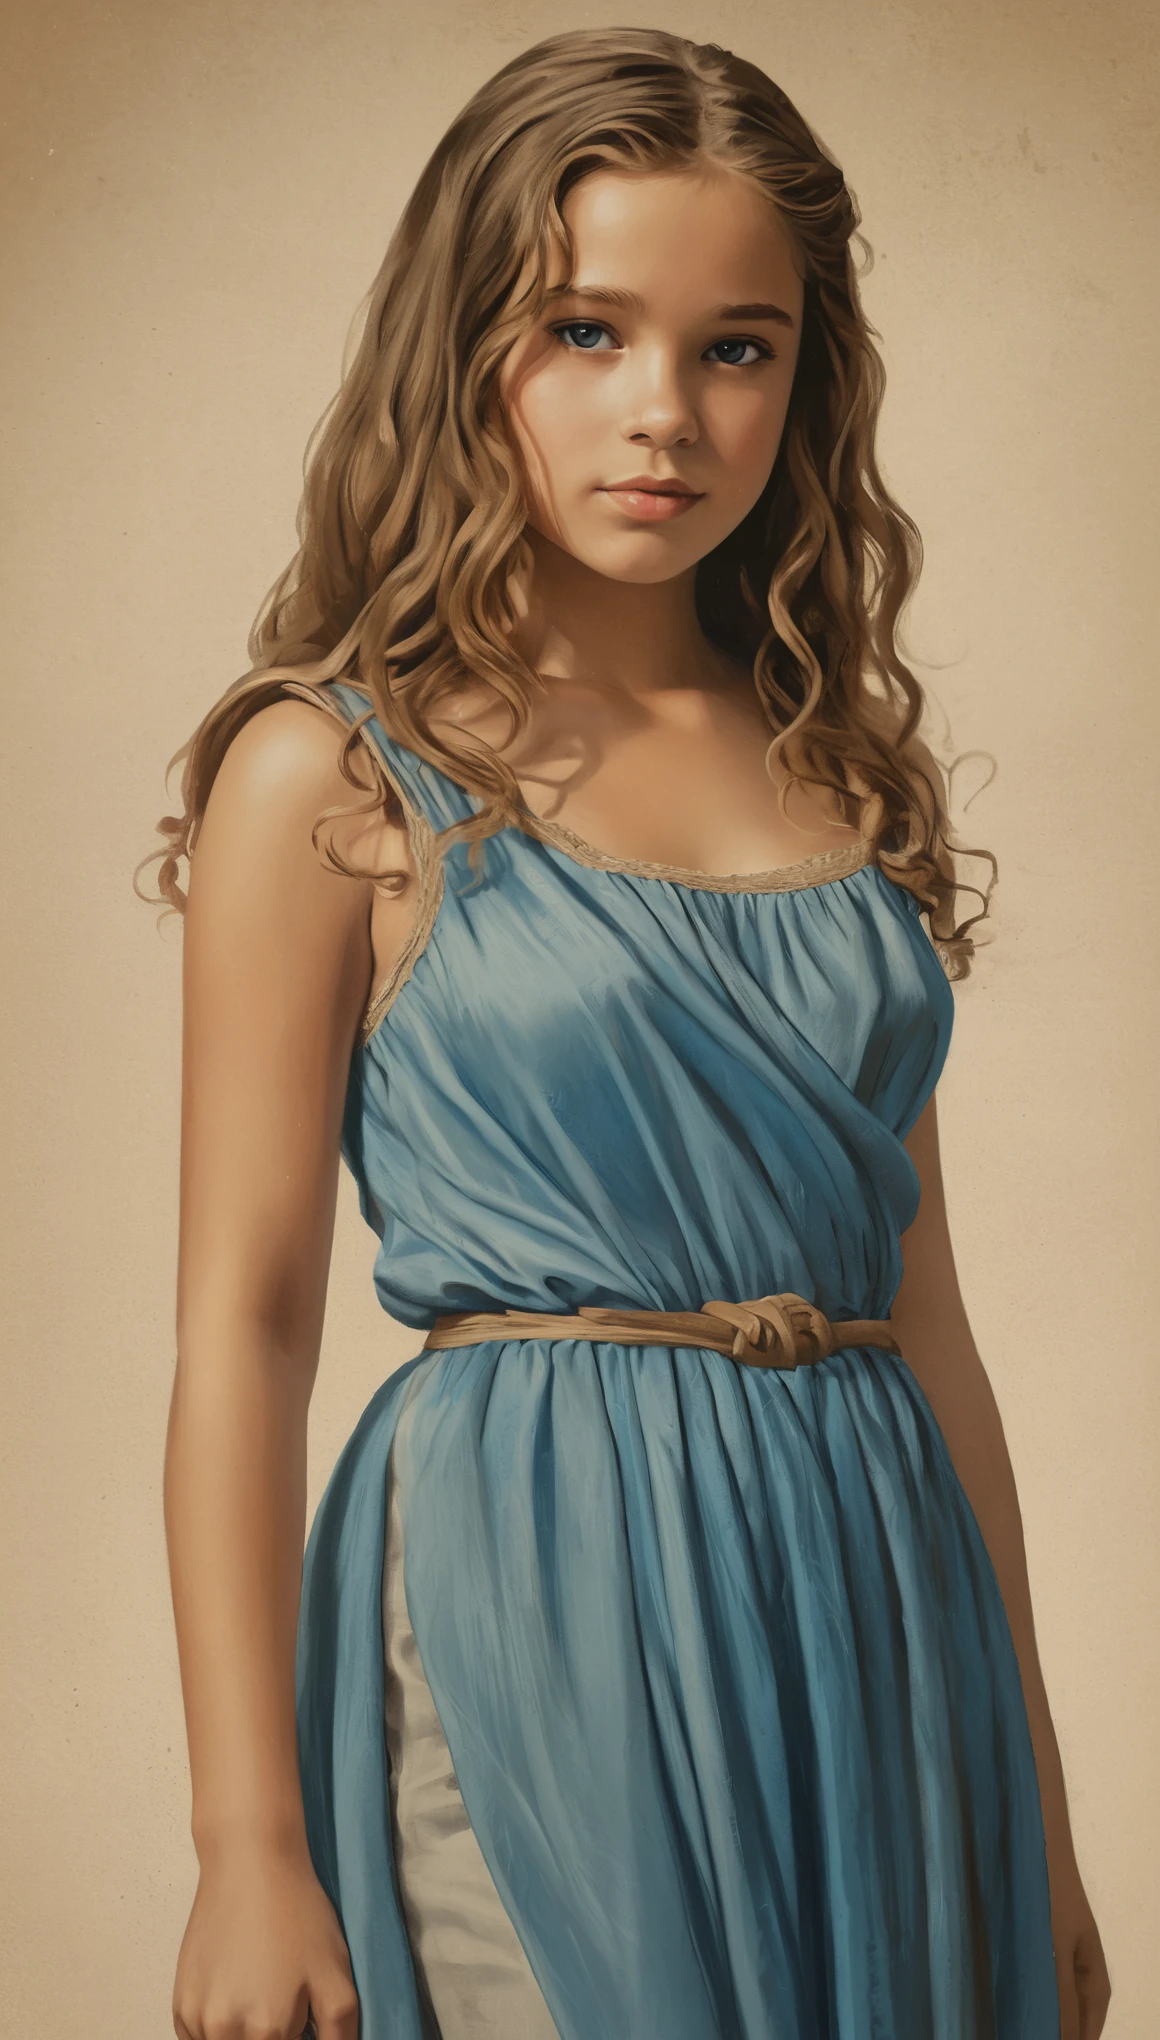 An illustrated movie poster, hand-drawn, full color, a young girl, wearing a chiton, resembles Mathilde Lando, warm brown complexion, azure blue eyes, sandy brown hair, long loose curls, waist-length hair, posing on a pedestal, hard shadows, graphite shading, stencil marks, airbrushed acrylic paint, masterpiece, in the style of Game of Thrones